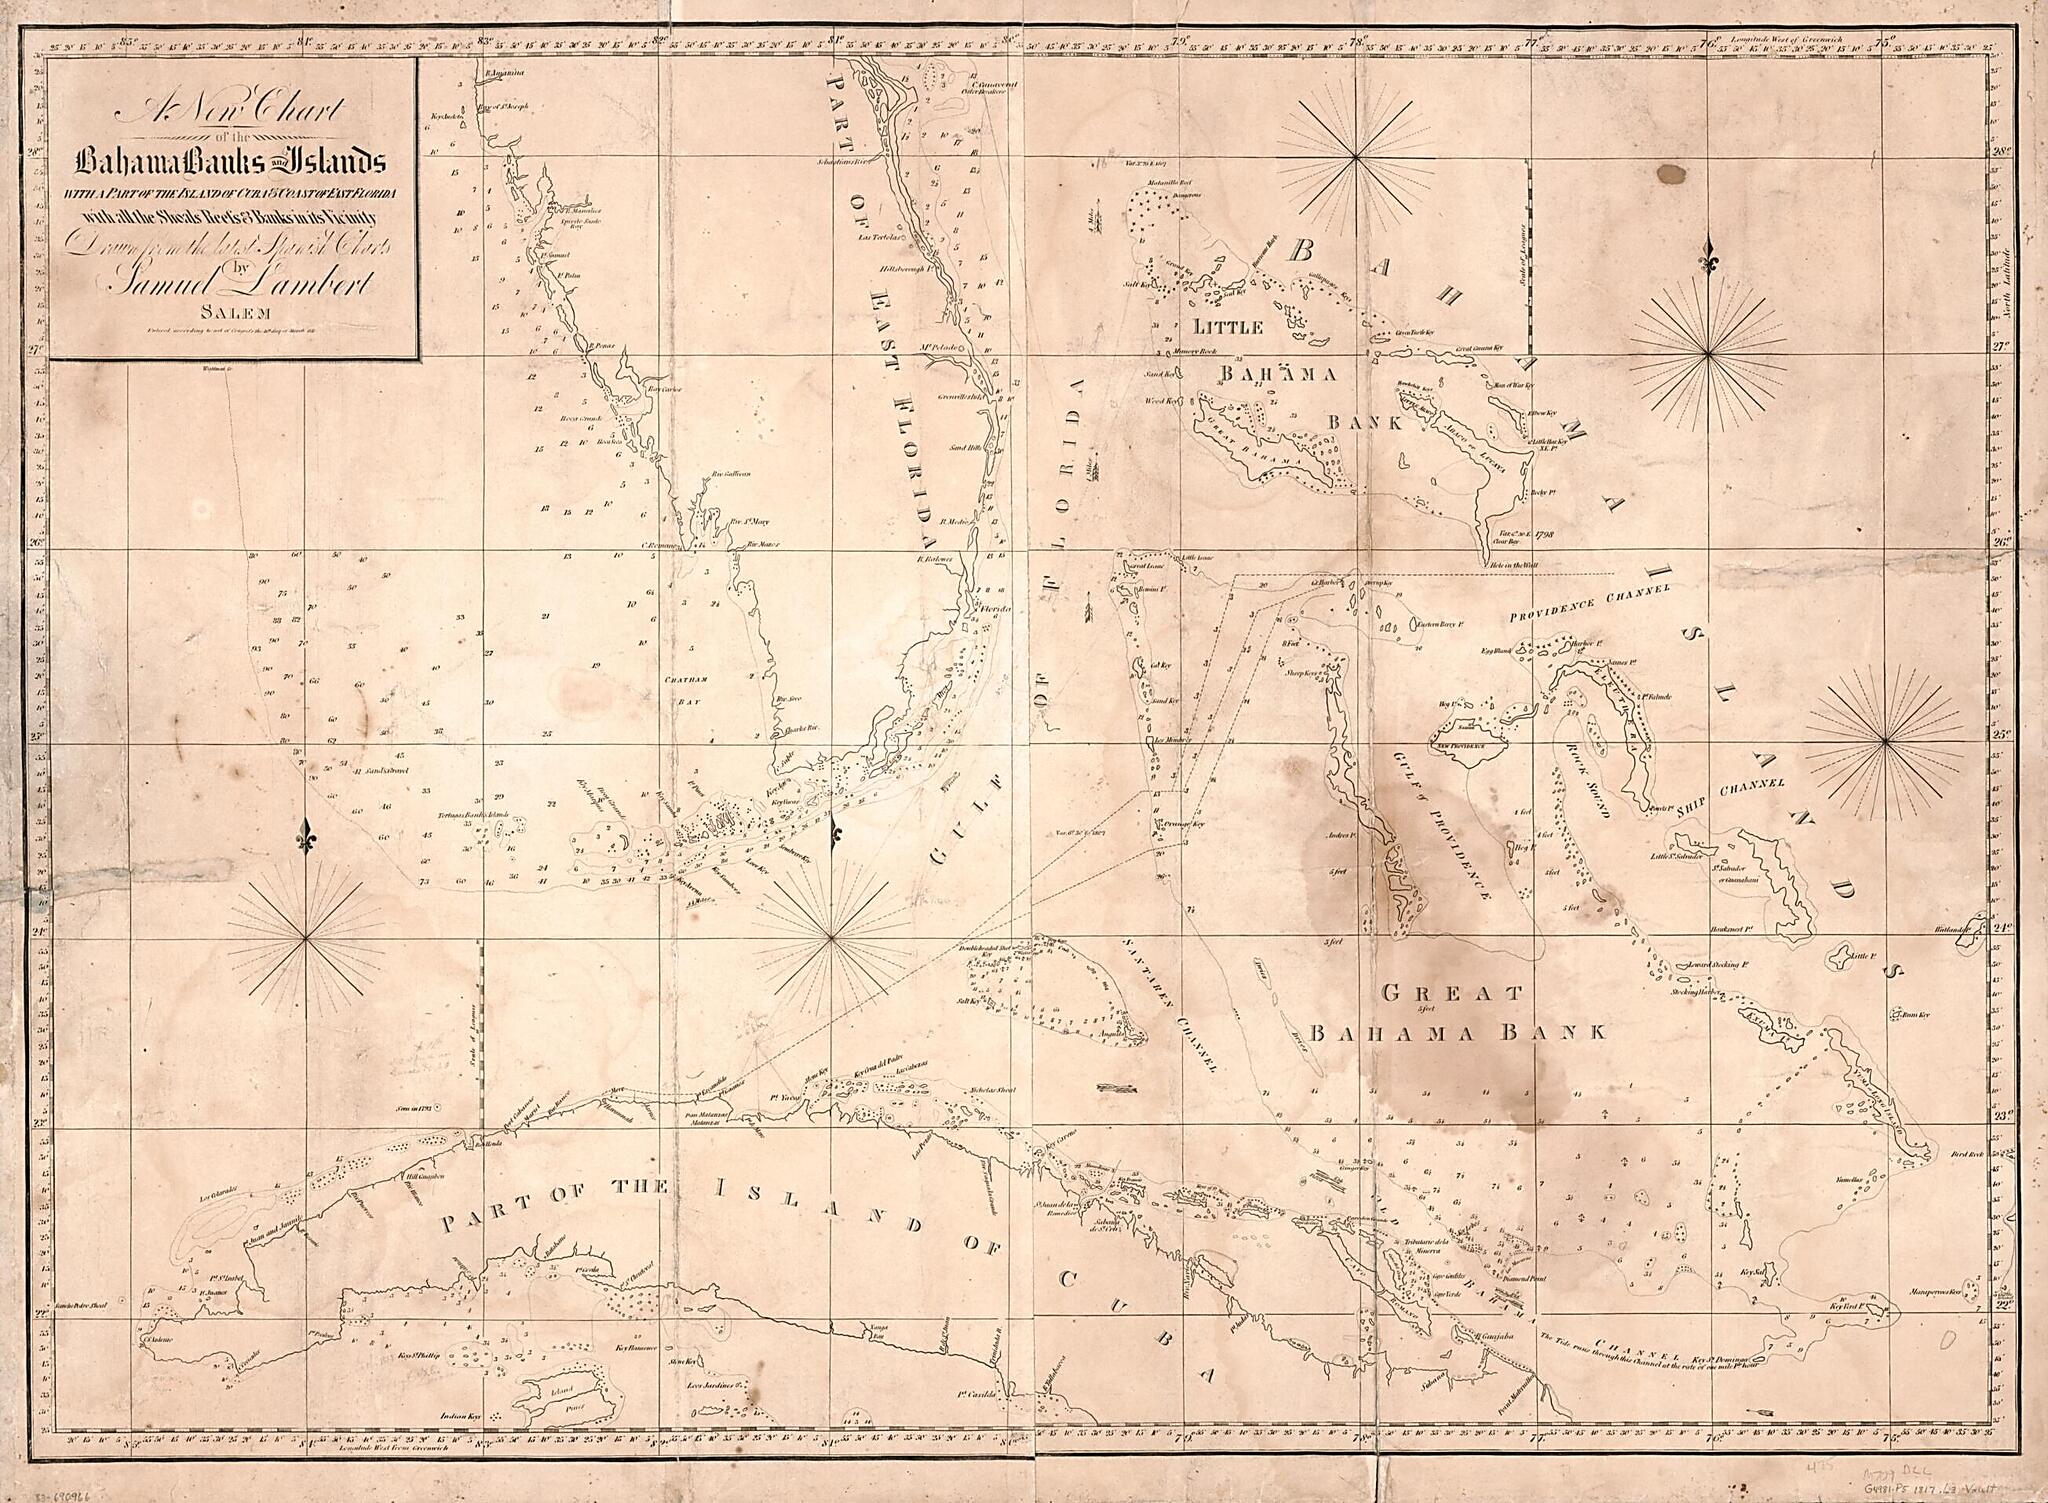 This old map of A New Chart of the Bahama Banks and Islands With a Part of the Island of Cuba &amp; Coast of East Florida With All the Shoals, Reefs and Banks In Its Vicinity from 1817 was created by Samuel Lambert in 1817